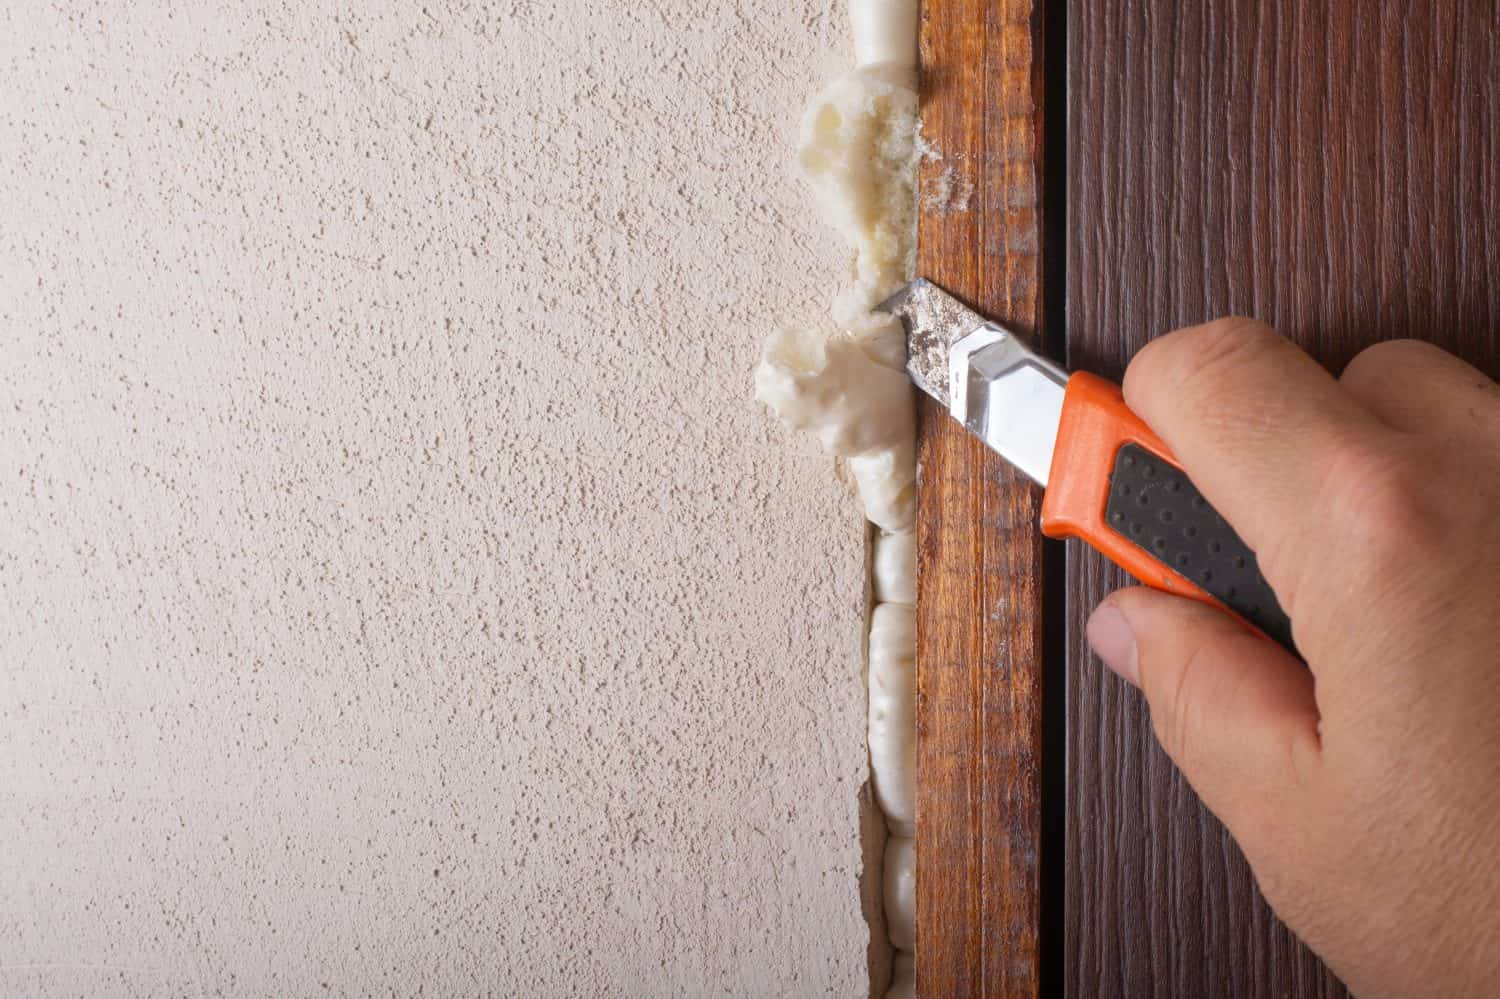 Remove excess polyurethane foam with a knife.